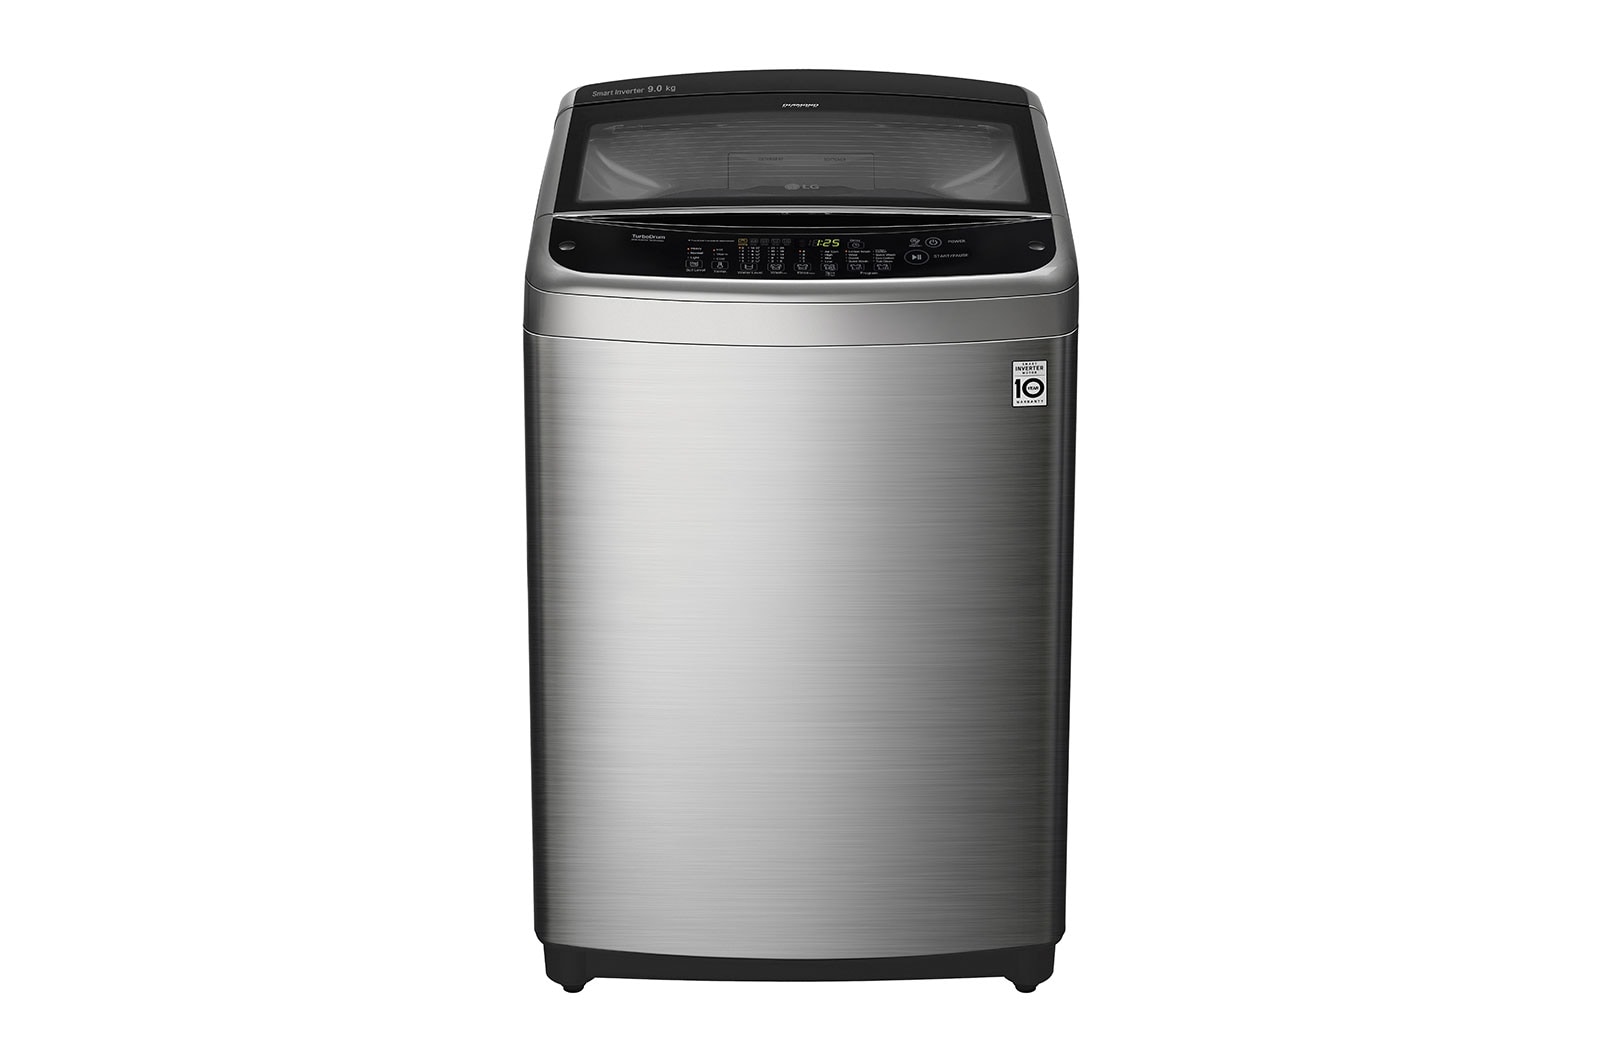 LG 9kg Top Load Washing Machine with Smart Inverter Control - Stainless Finish, WTG9020V